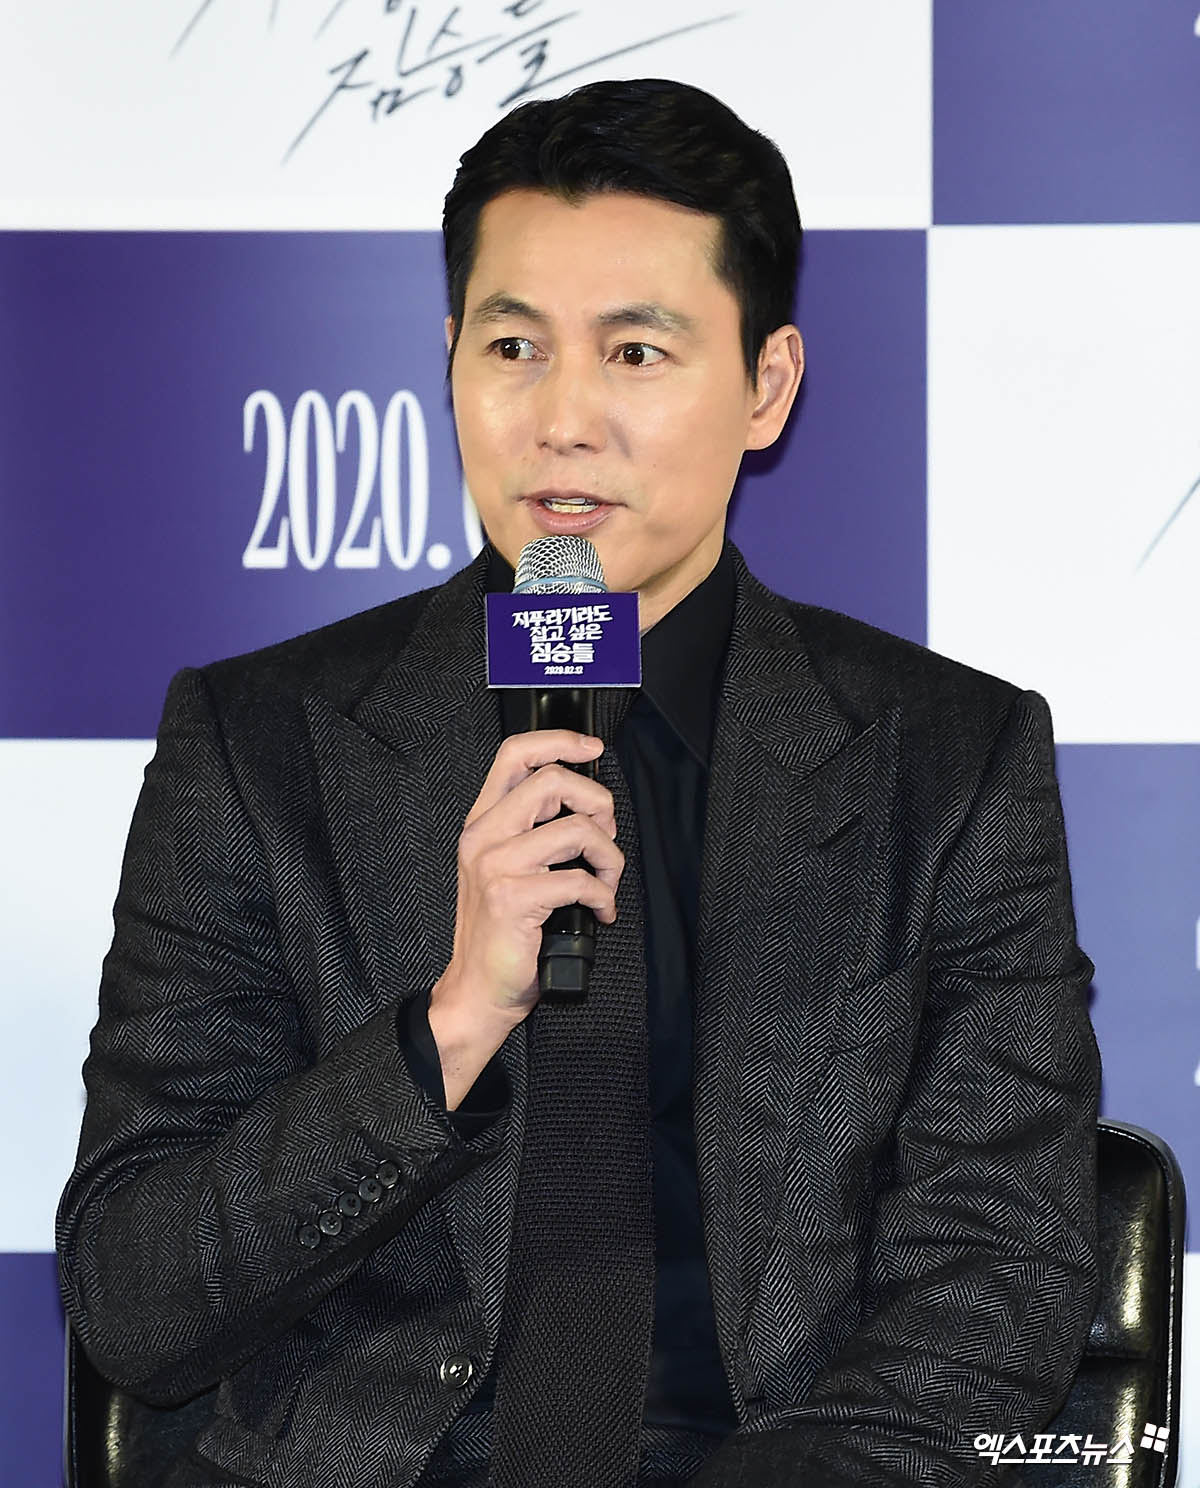 Jung Woo-sung gave a feeling that he had his first co-work with Jeon Do-yeon.On the 13th, a production report of the movie The Animals Who Want to Hold the Jeep (director Kim Yong-hoon) was held at Megabox Seongsu in Seouls Sejongdong District.Actor Jeon Do-yeon, Jung Woo-sung, Yoon Yeo-jung, Shin Hyun-bin, Jungaram and Kim Yong-hoon attended the ceremony.On this day, Jung Woo-sung said, I participated in the movie, which shows how much I can be destitute and feel in front of the material when I look at the scenario.I was able to be with Jeon Do-yeon, so I chose it. Many people said that I would have worked with Jeon Do-yeon, but I never did.I wondered why I couldnt do it. I thought co-working would be fun. It was a short but fun task.Meanwhile, The Animals Who Want to Hold the Spray is a crime drama of ordinary humans planning the worst of the worst to take the last chance of life, the money bag.